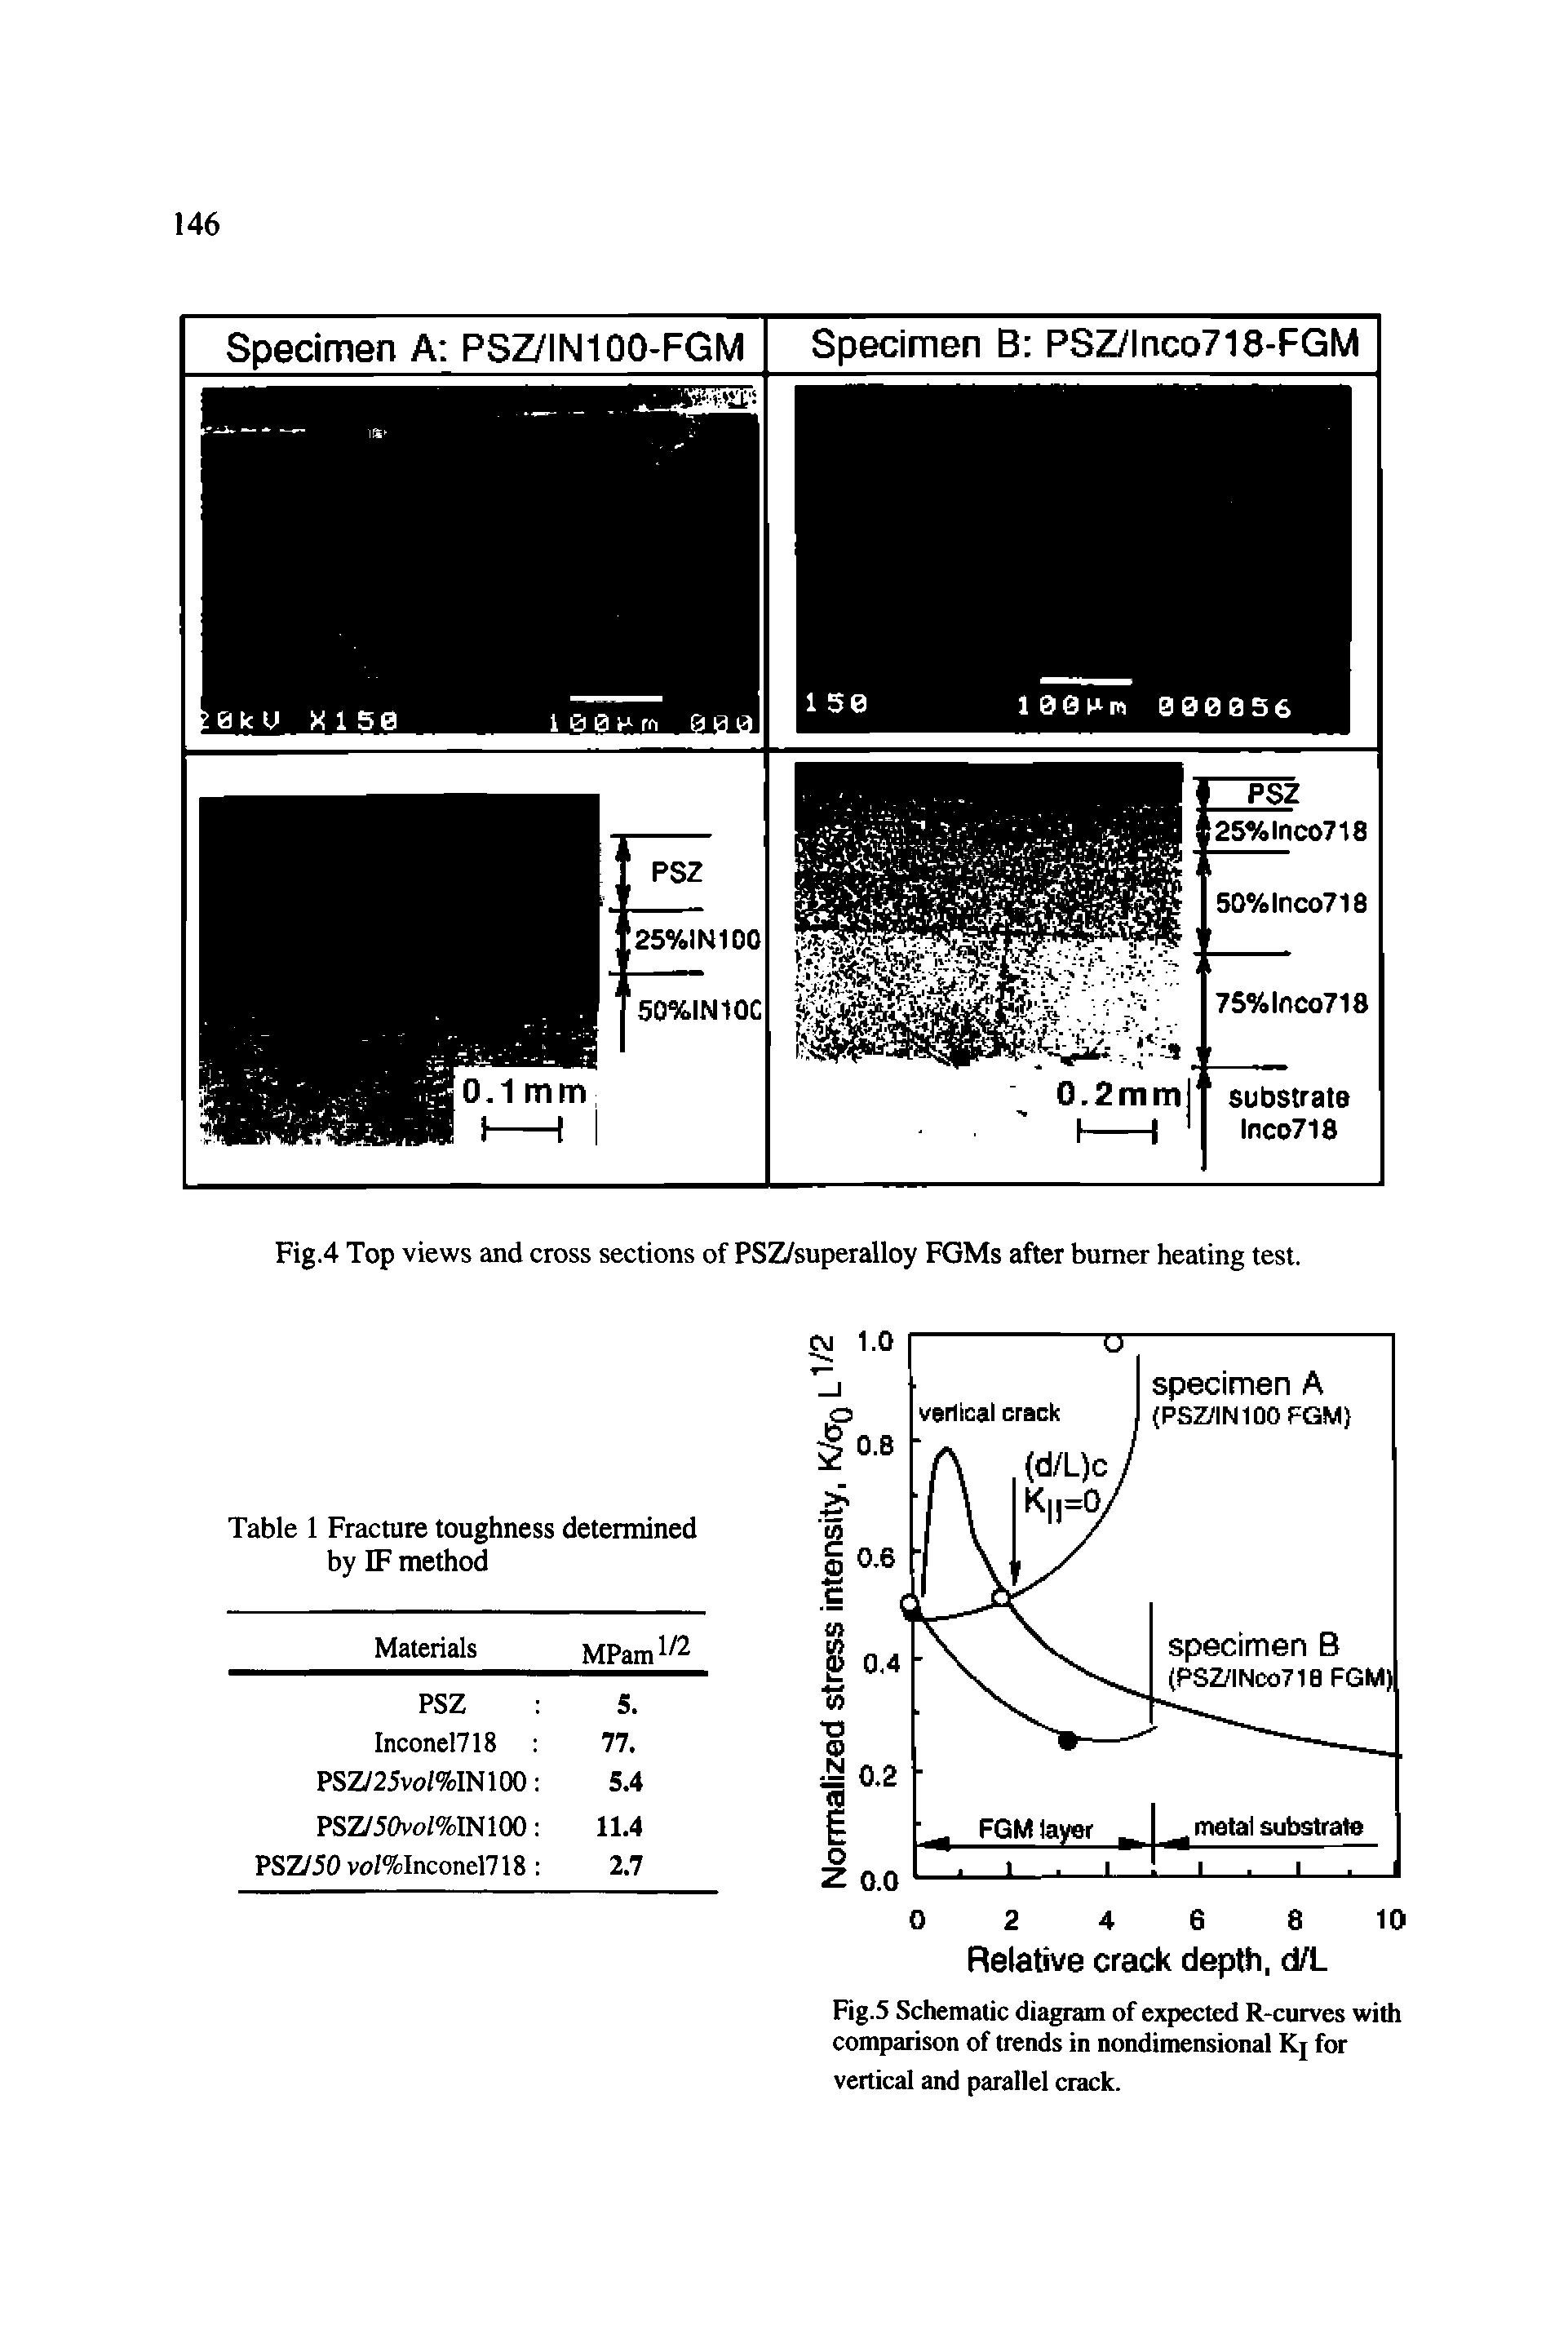 Fig.5 Schematic diagram of expected R-curves with comparison of trends in nondimensional Kj for vertical and parallel crack.